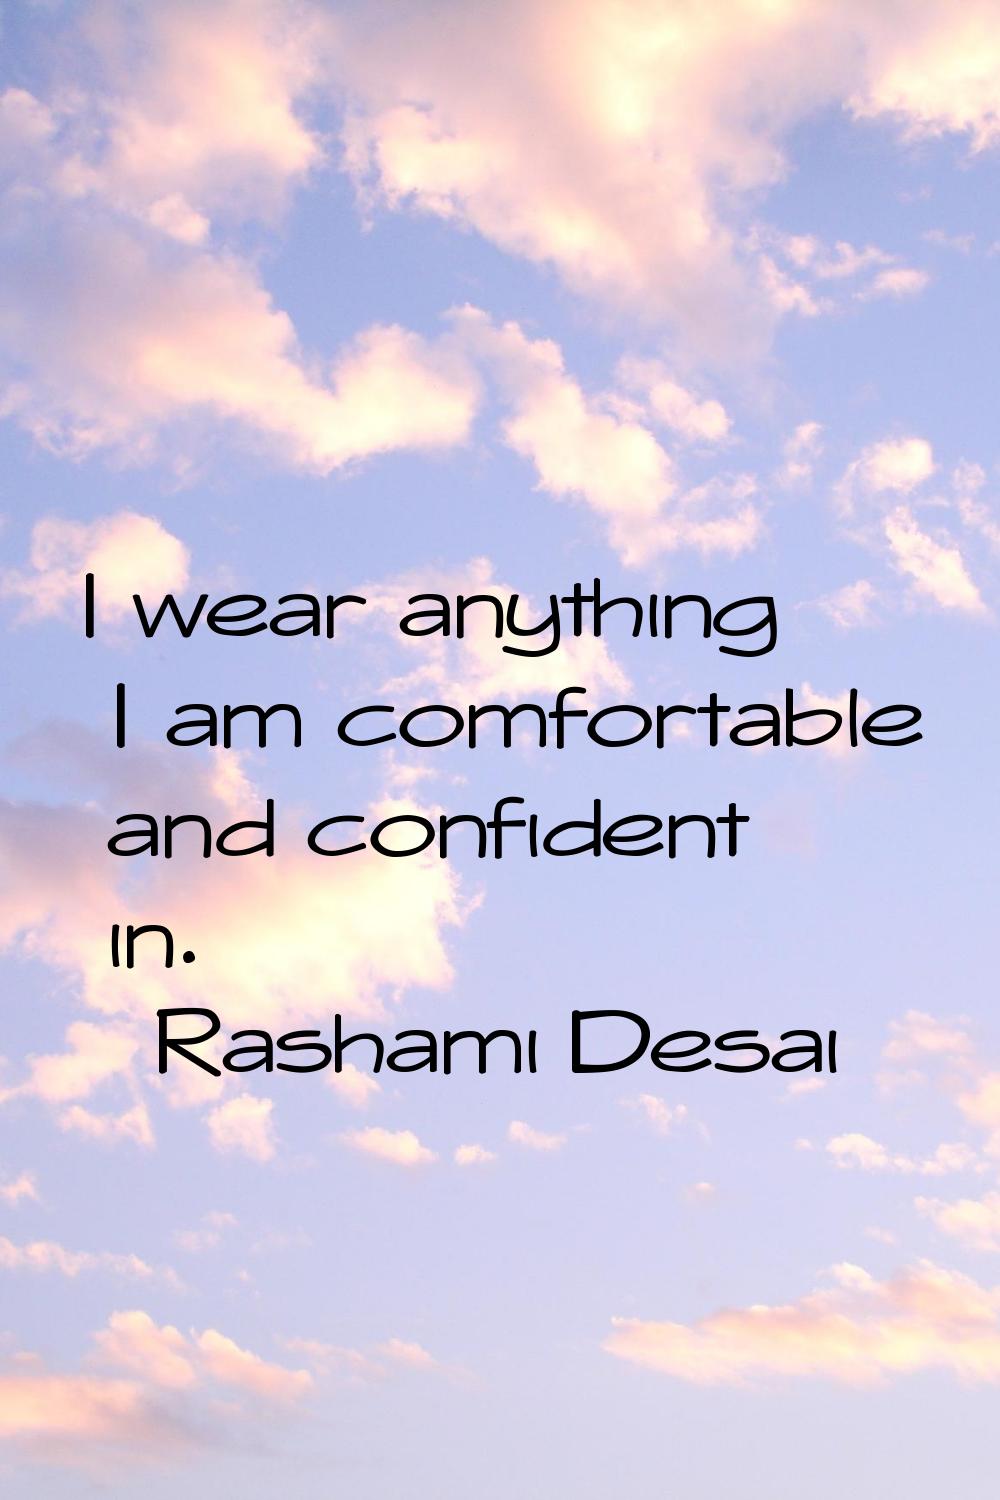 I wear anything I am comfortable and confident in.